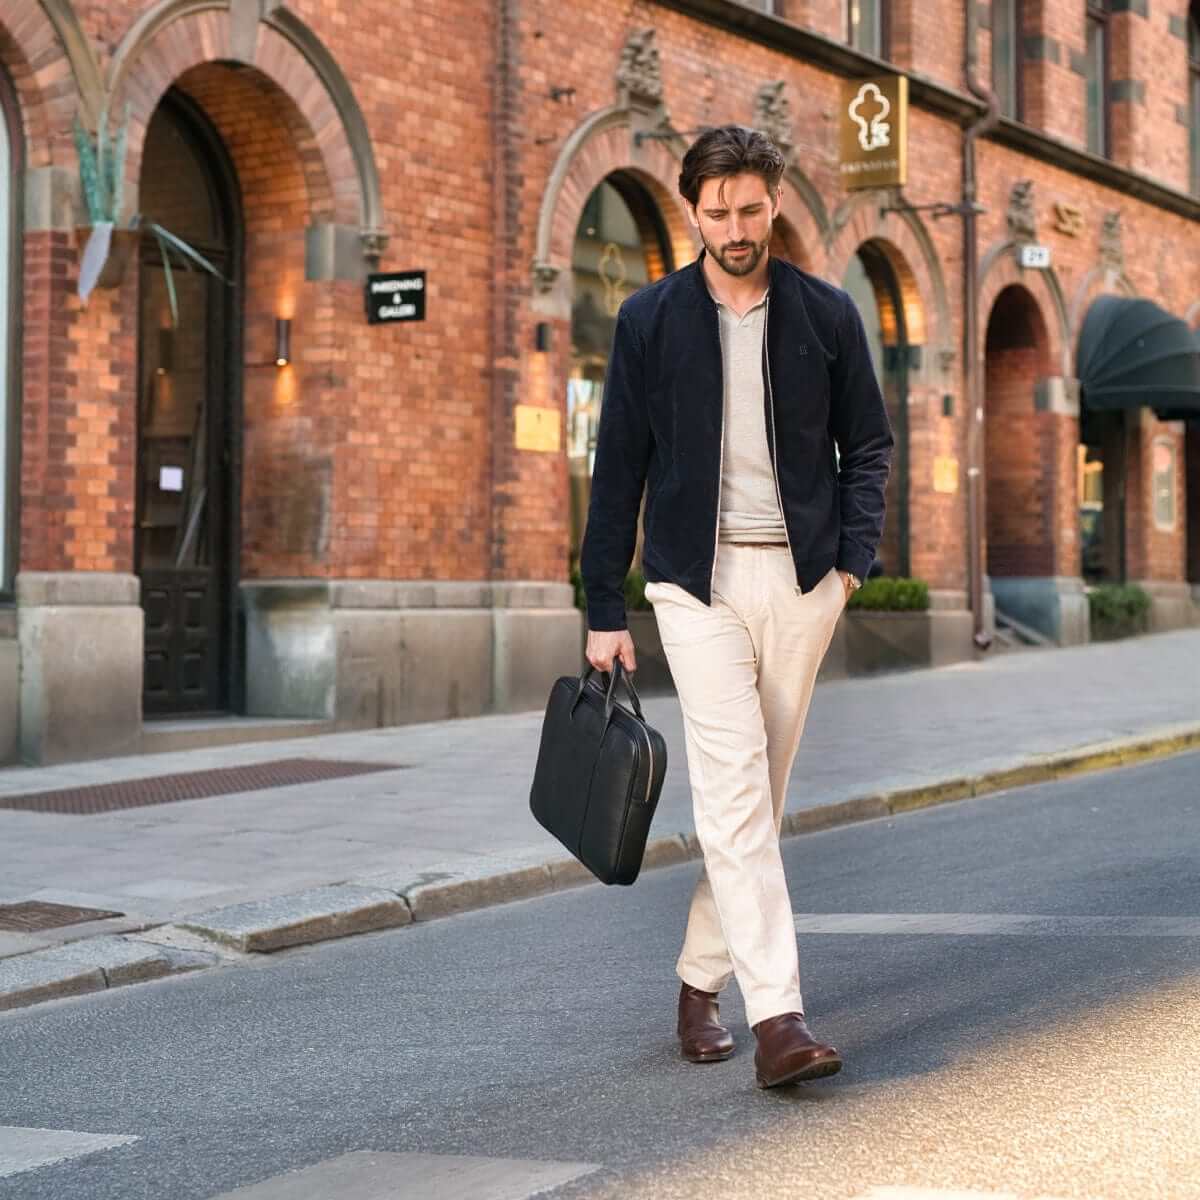 Elegant Scandinavian design of the Arsante Classic Briefcase, featuring ergonomic handles and a curved silhouette for a sophisticated look.